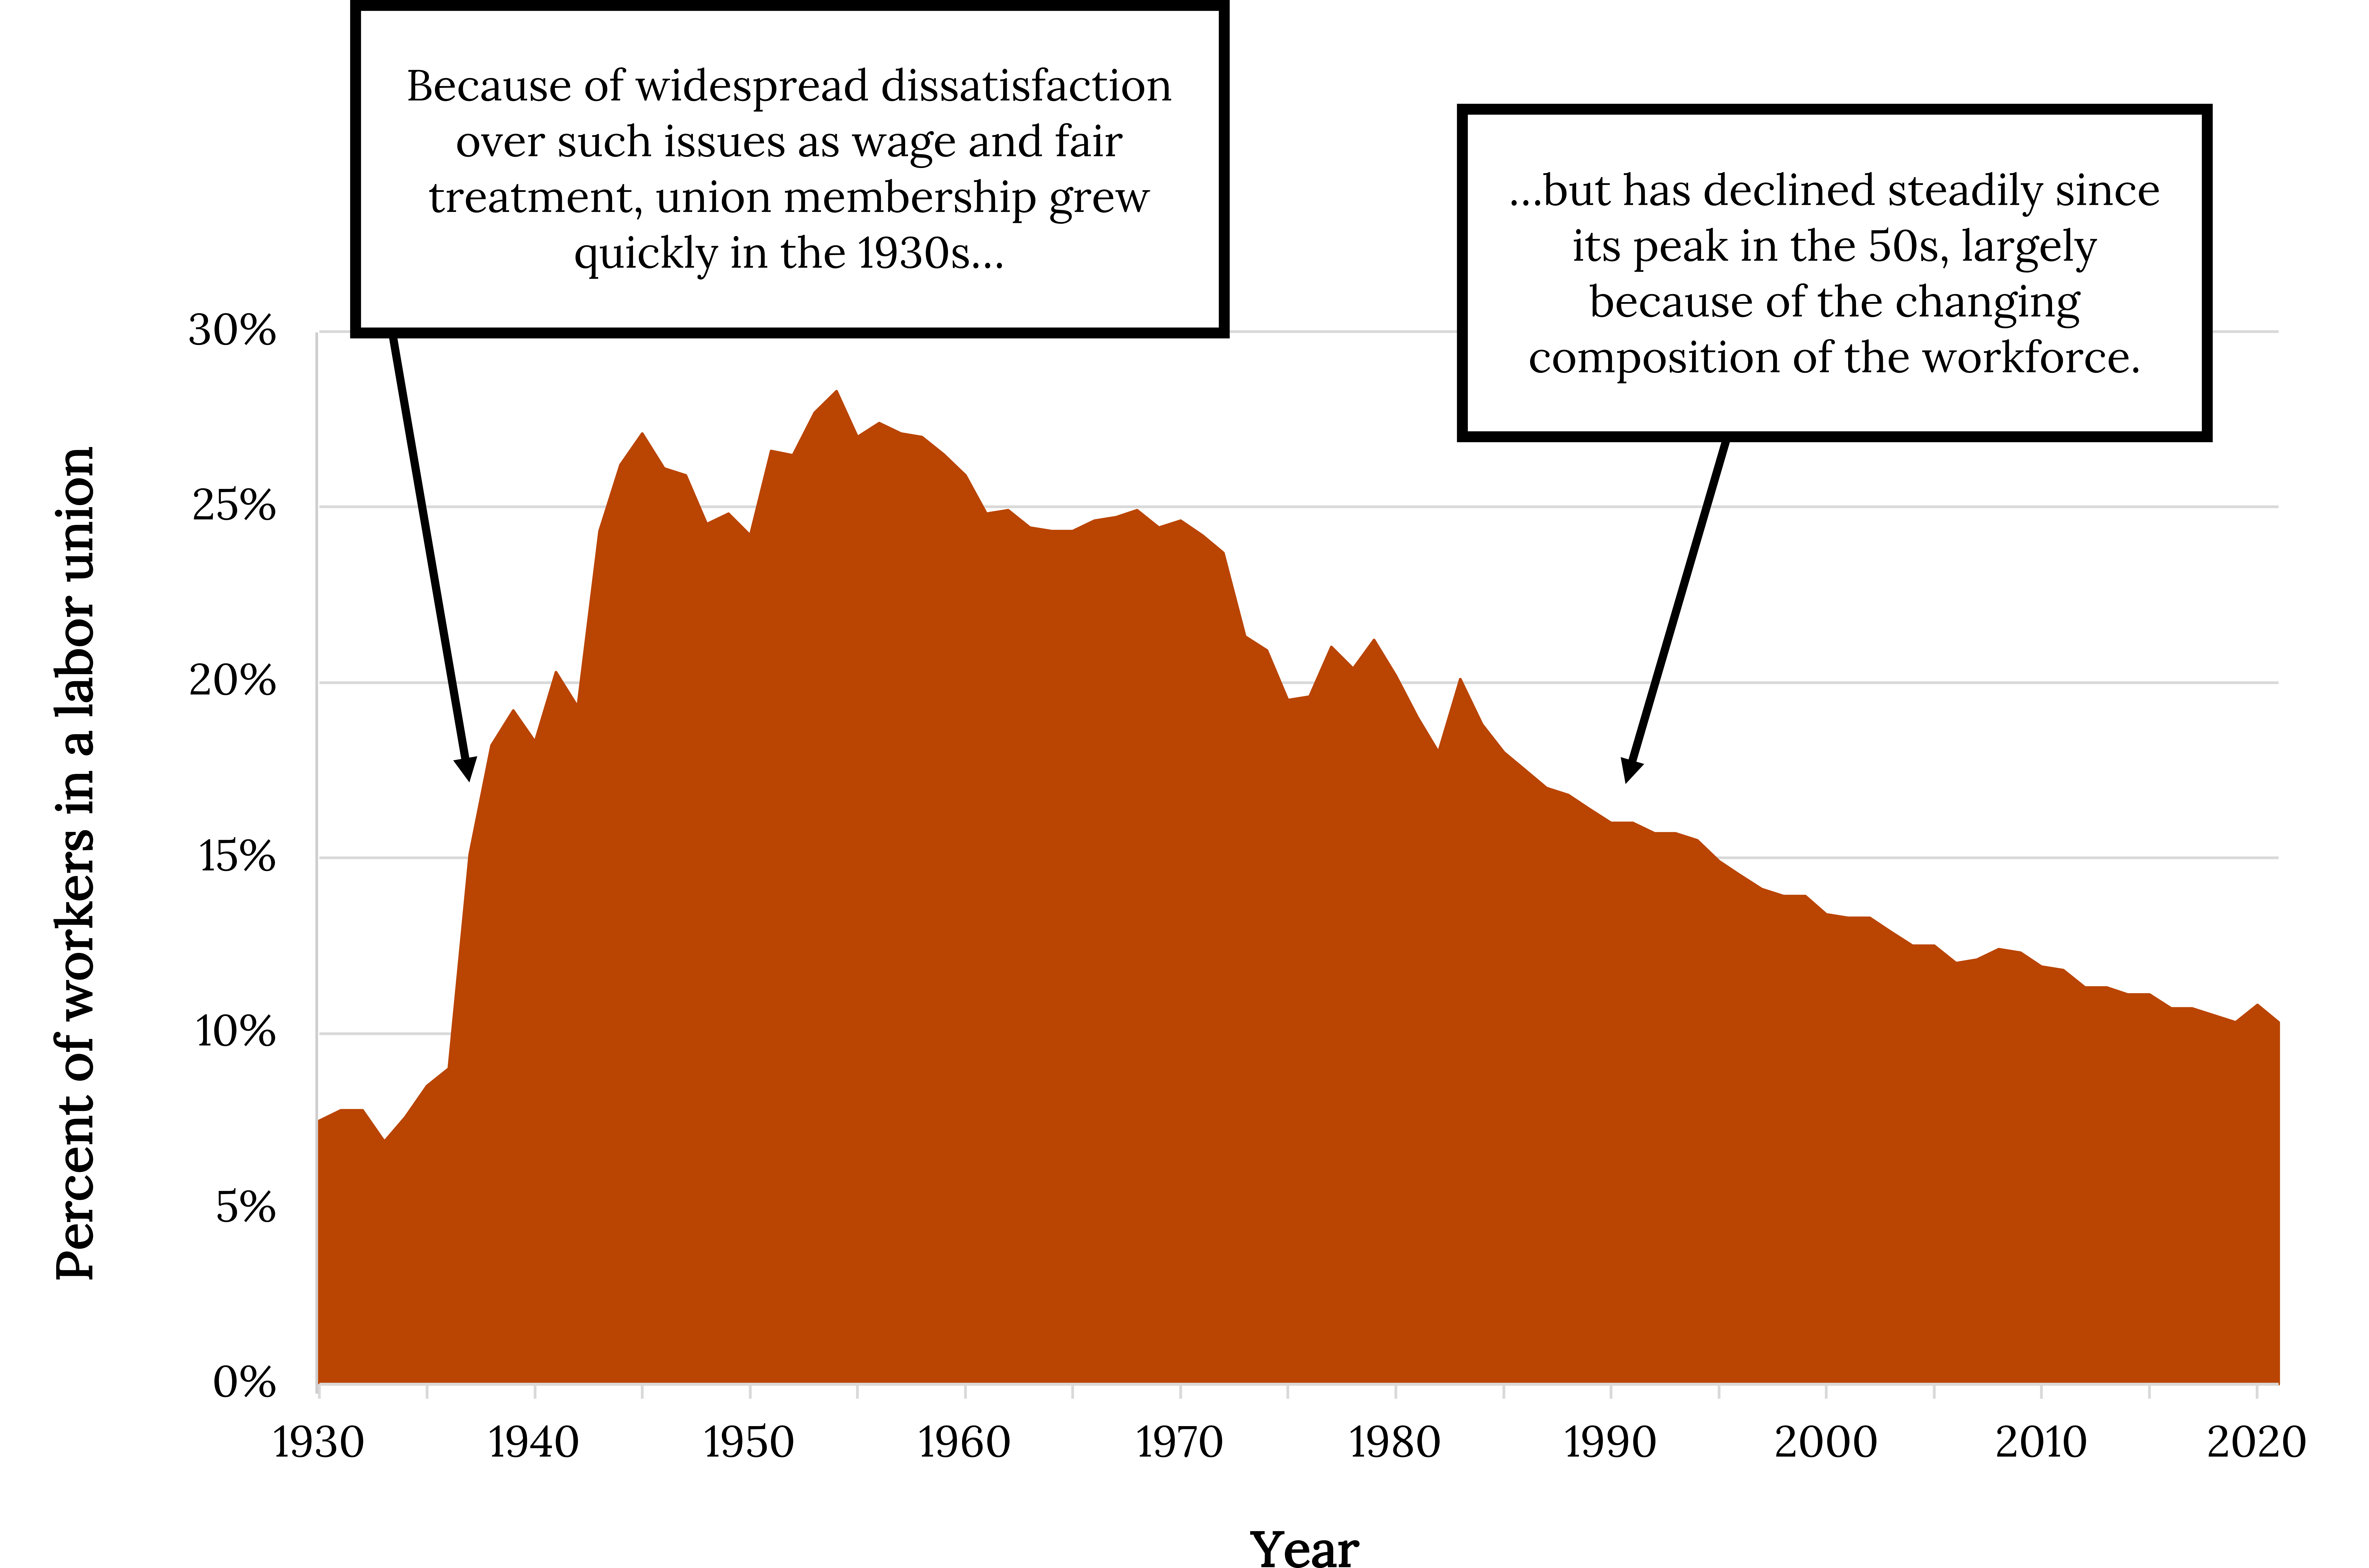 A graph of union membership in the United States. The x-axis shows years from 1930 to 2020 in 10 year increments. The y-axis shows percentage of total employment from 0% to 30% in increments of 5%. The graph begins near 7% in 1930, and increases quickly to almost 30% in the 1950s. The graph then slowly decreases over time, to slightly above 10% in 2015. Two text boxes rest over the graph. One text box points toward the increase between 1930 and 1950 and reads: “Because of widespread dissatisfaction over such issues as wages and fair treatment, union membership grew quickly in the 1930s…” The second text box points toward the decline between 1950 and 2015 and reads: “...but has declined steadily since its peak in the 1950s, largely because of the changing composition of the workforce.”